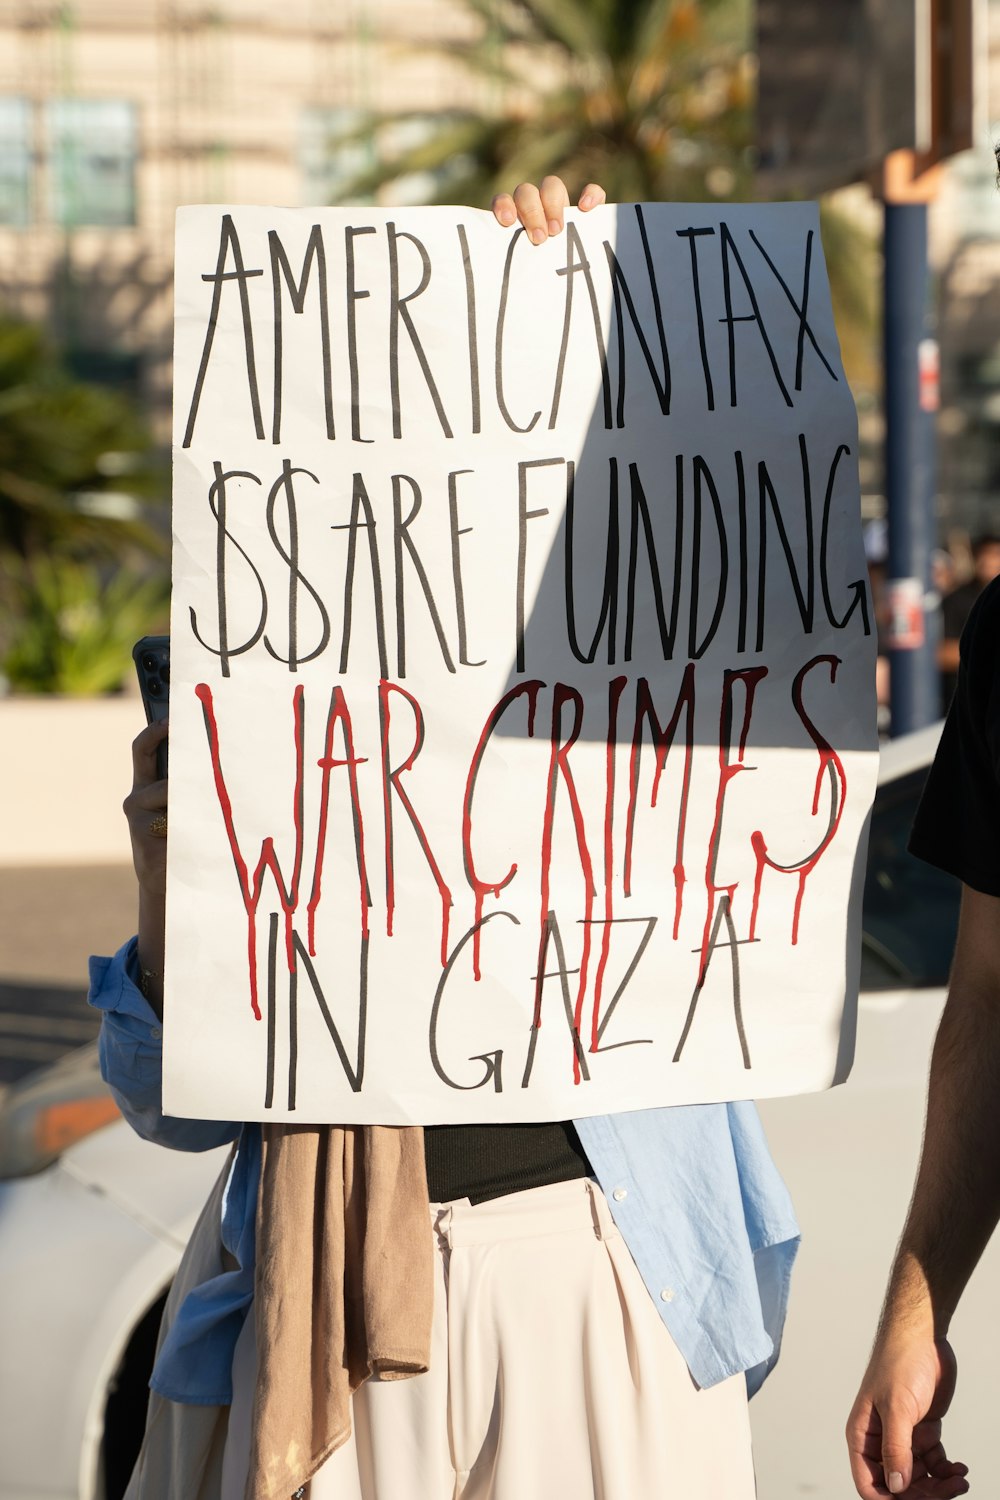 a man holding a sign that says war crime?